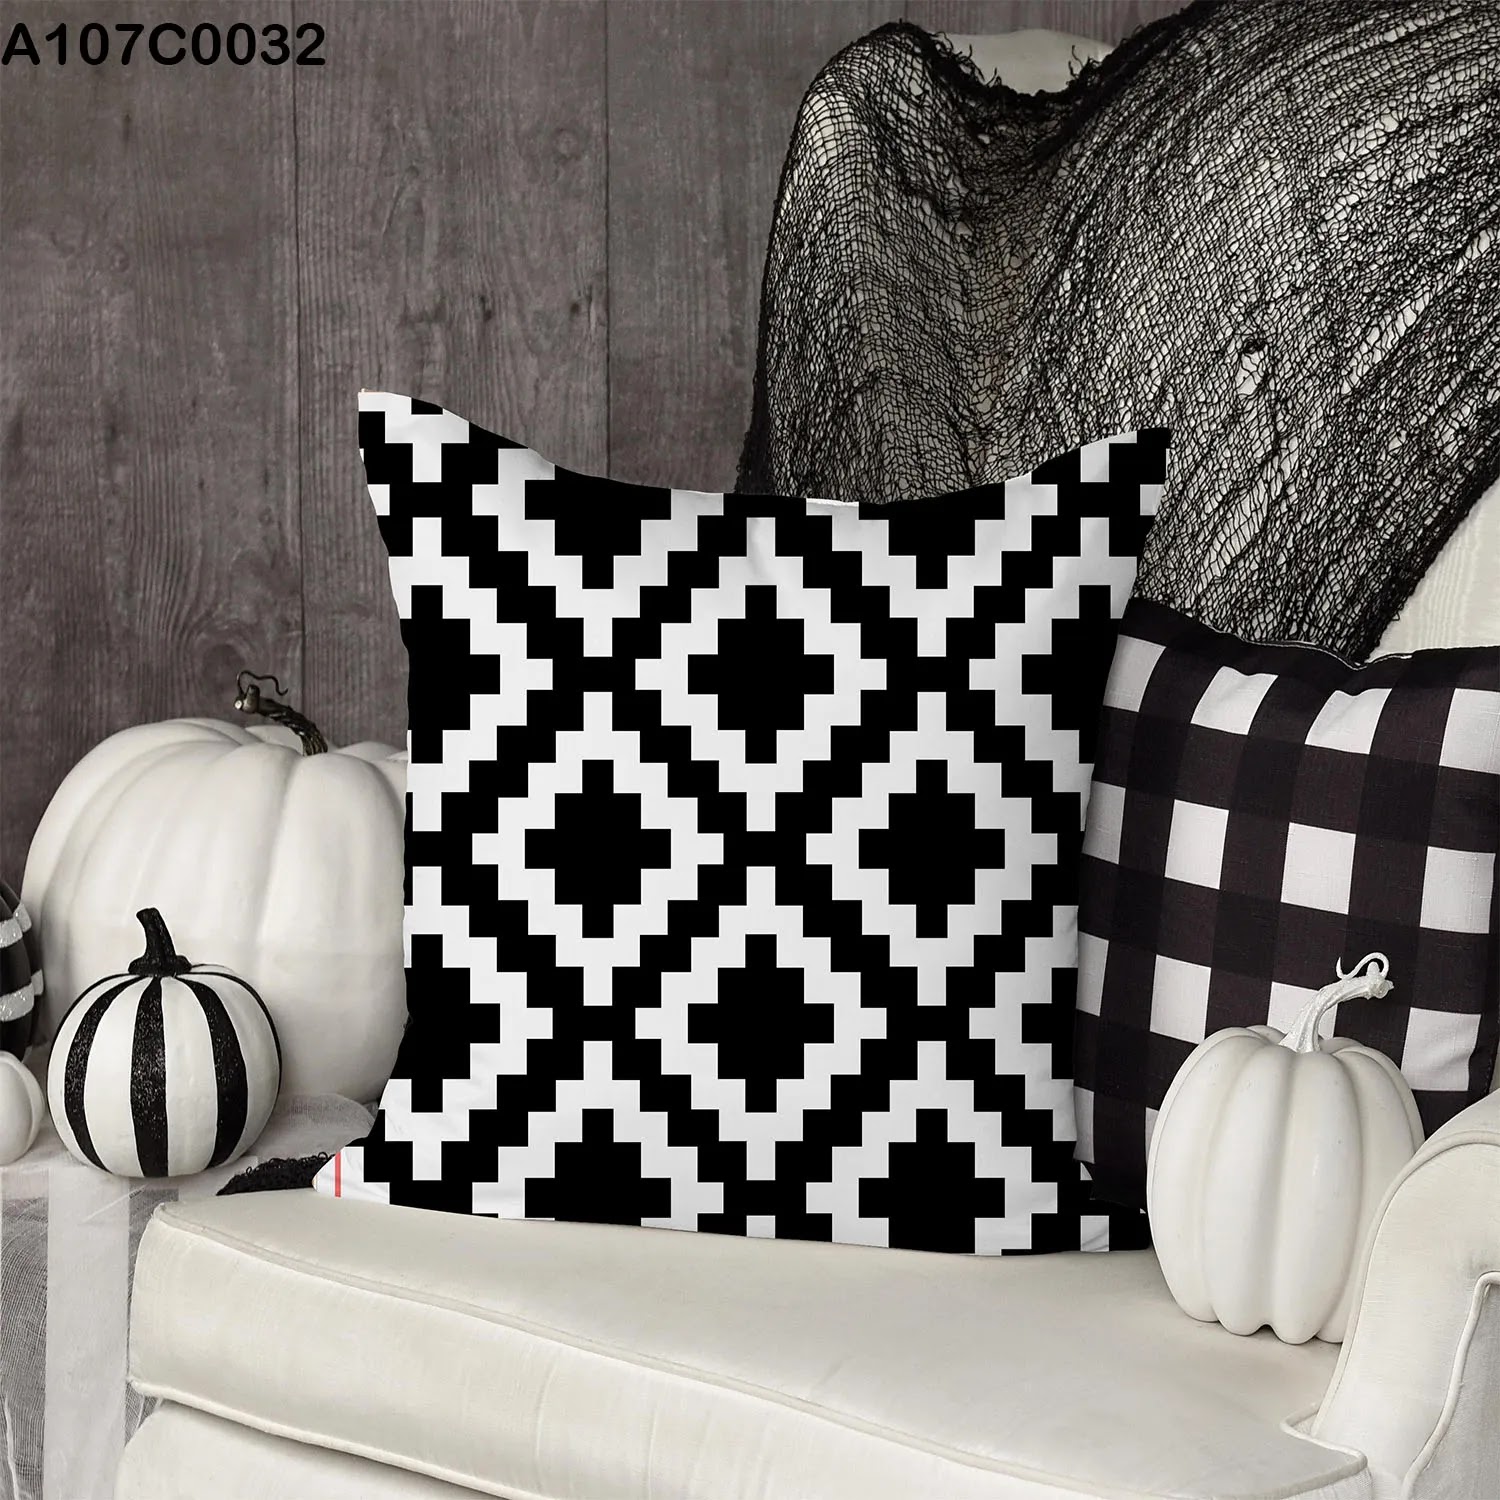 White and black striped pillow case